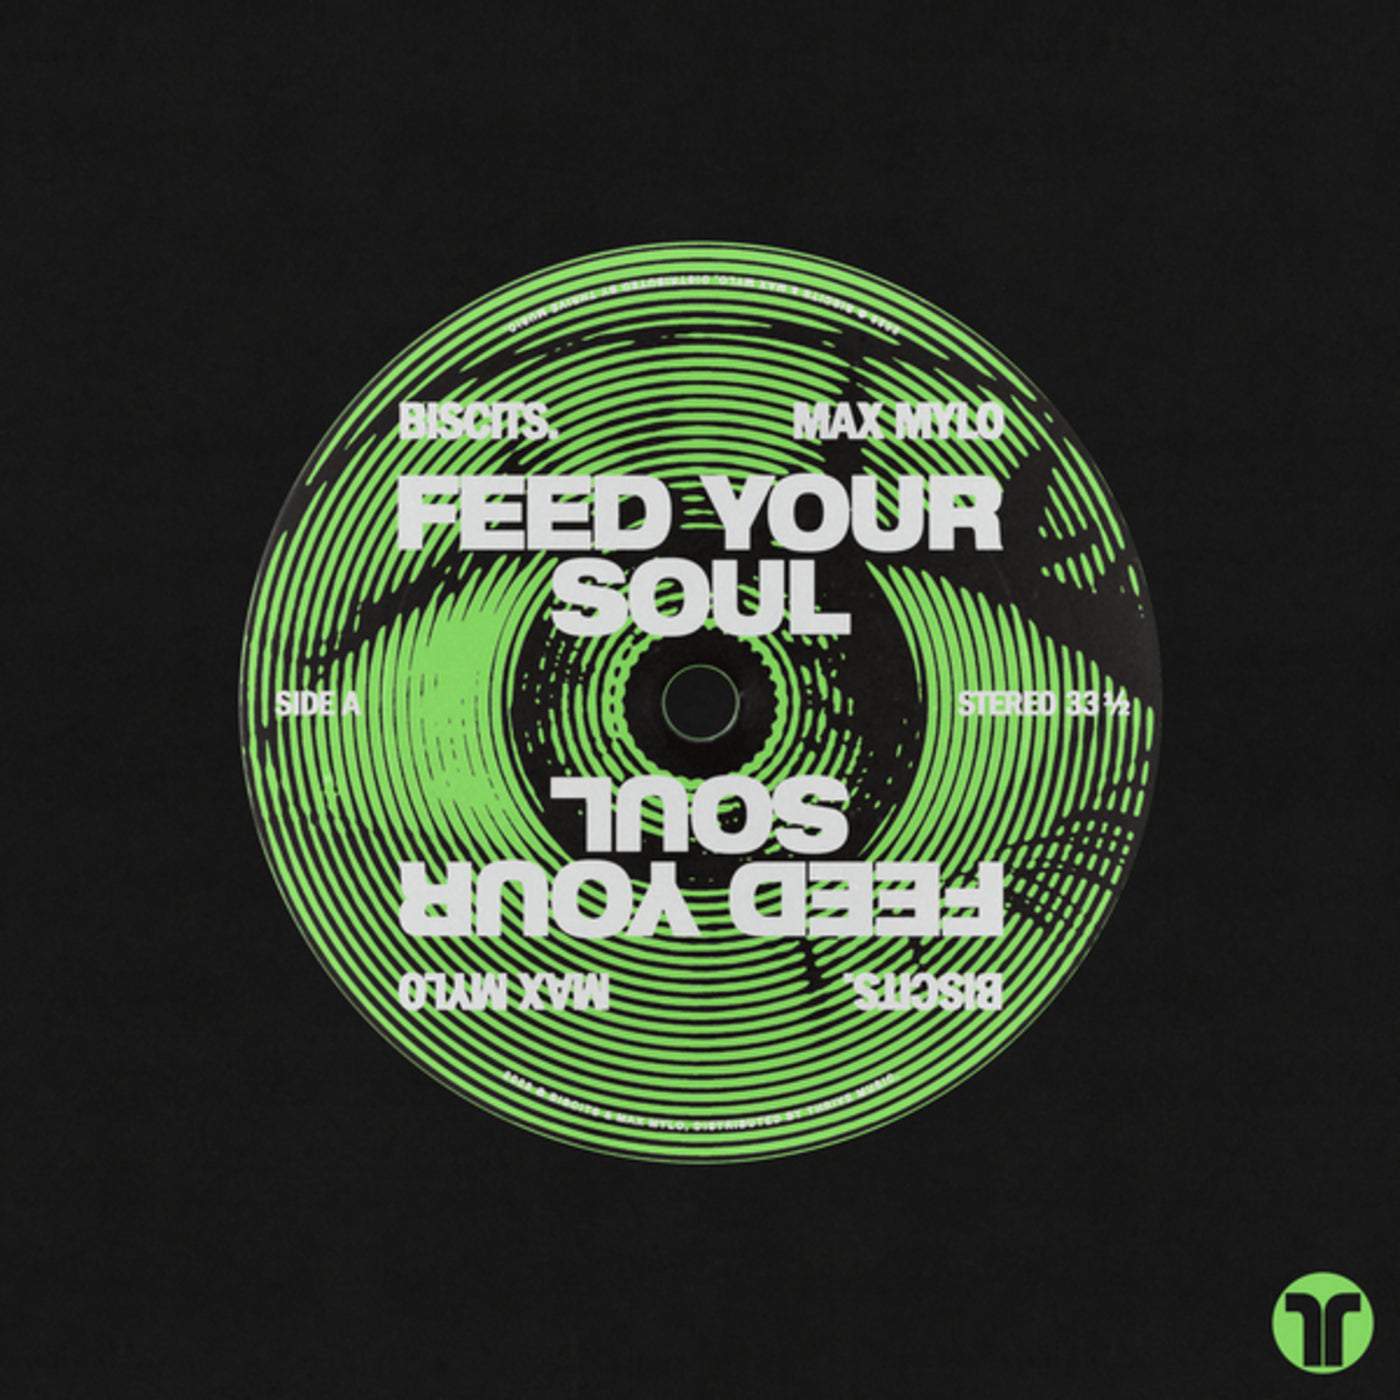 Download Biscits, Max Mylo - Feed Your Soul on Electrobuzz